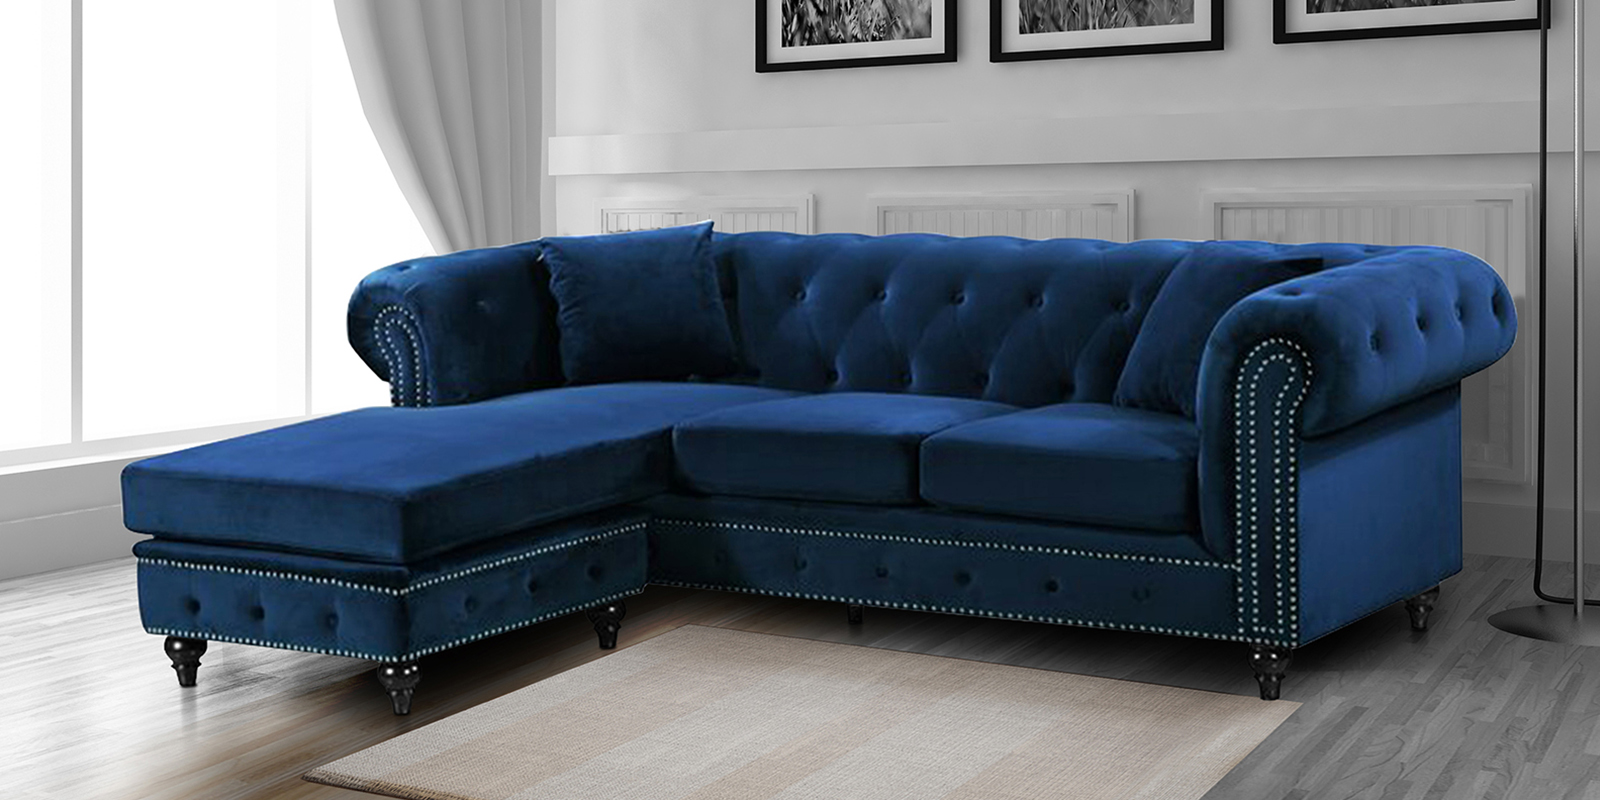 Courageous Velvet Rhs Sectional Sofa In